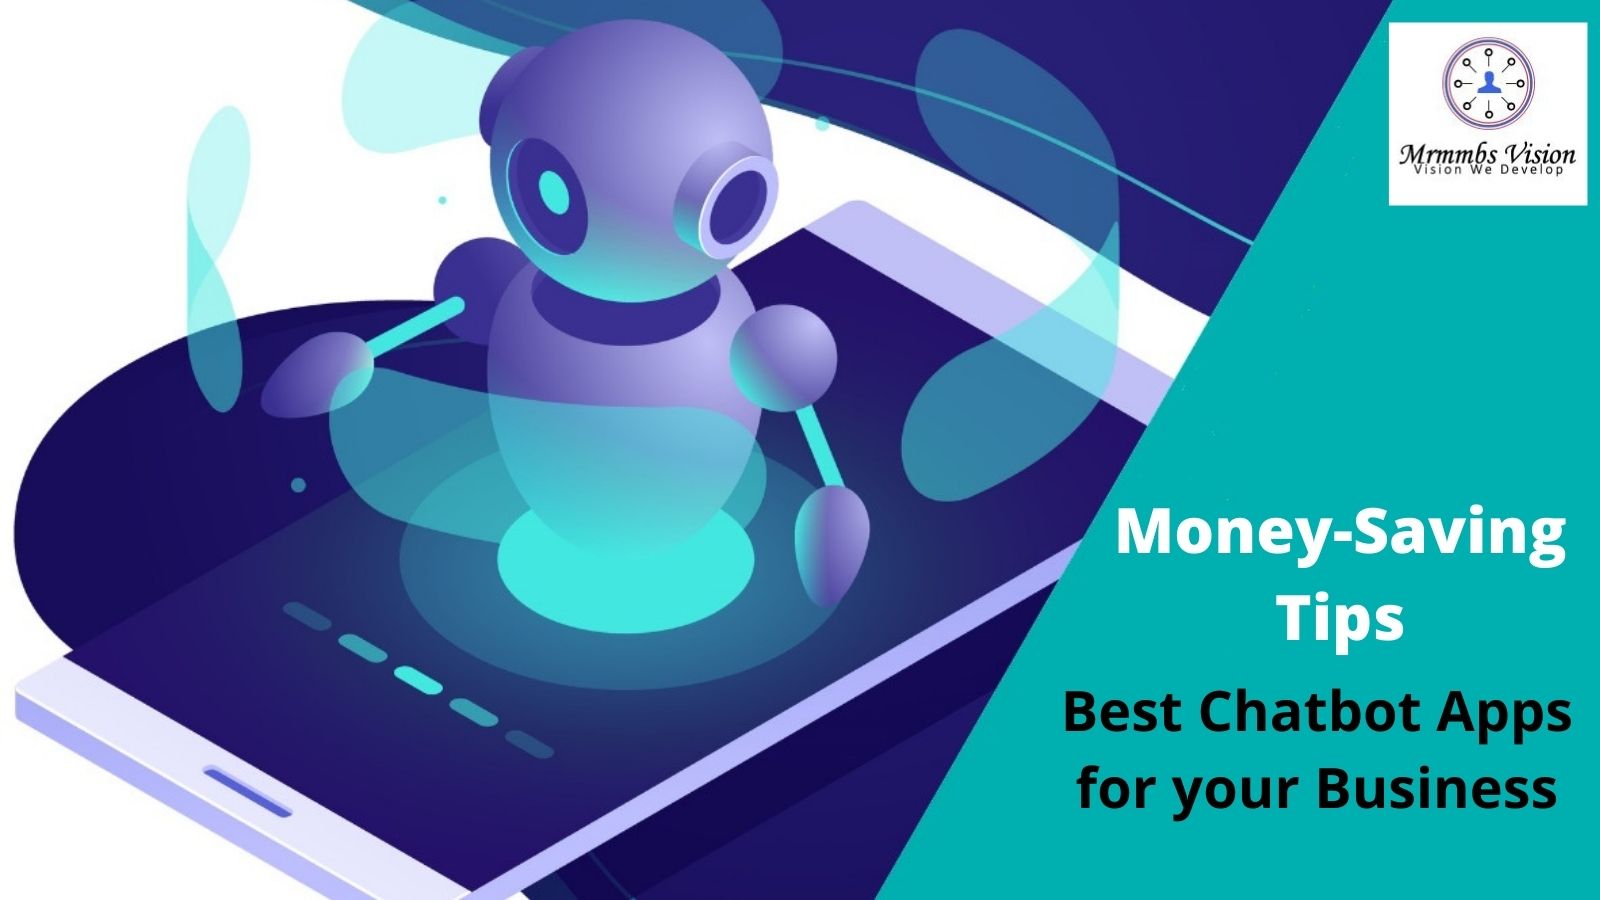 Money-Saving Tips: Best Chatbot Apps for your Business